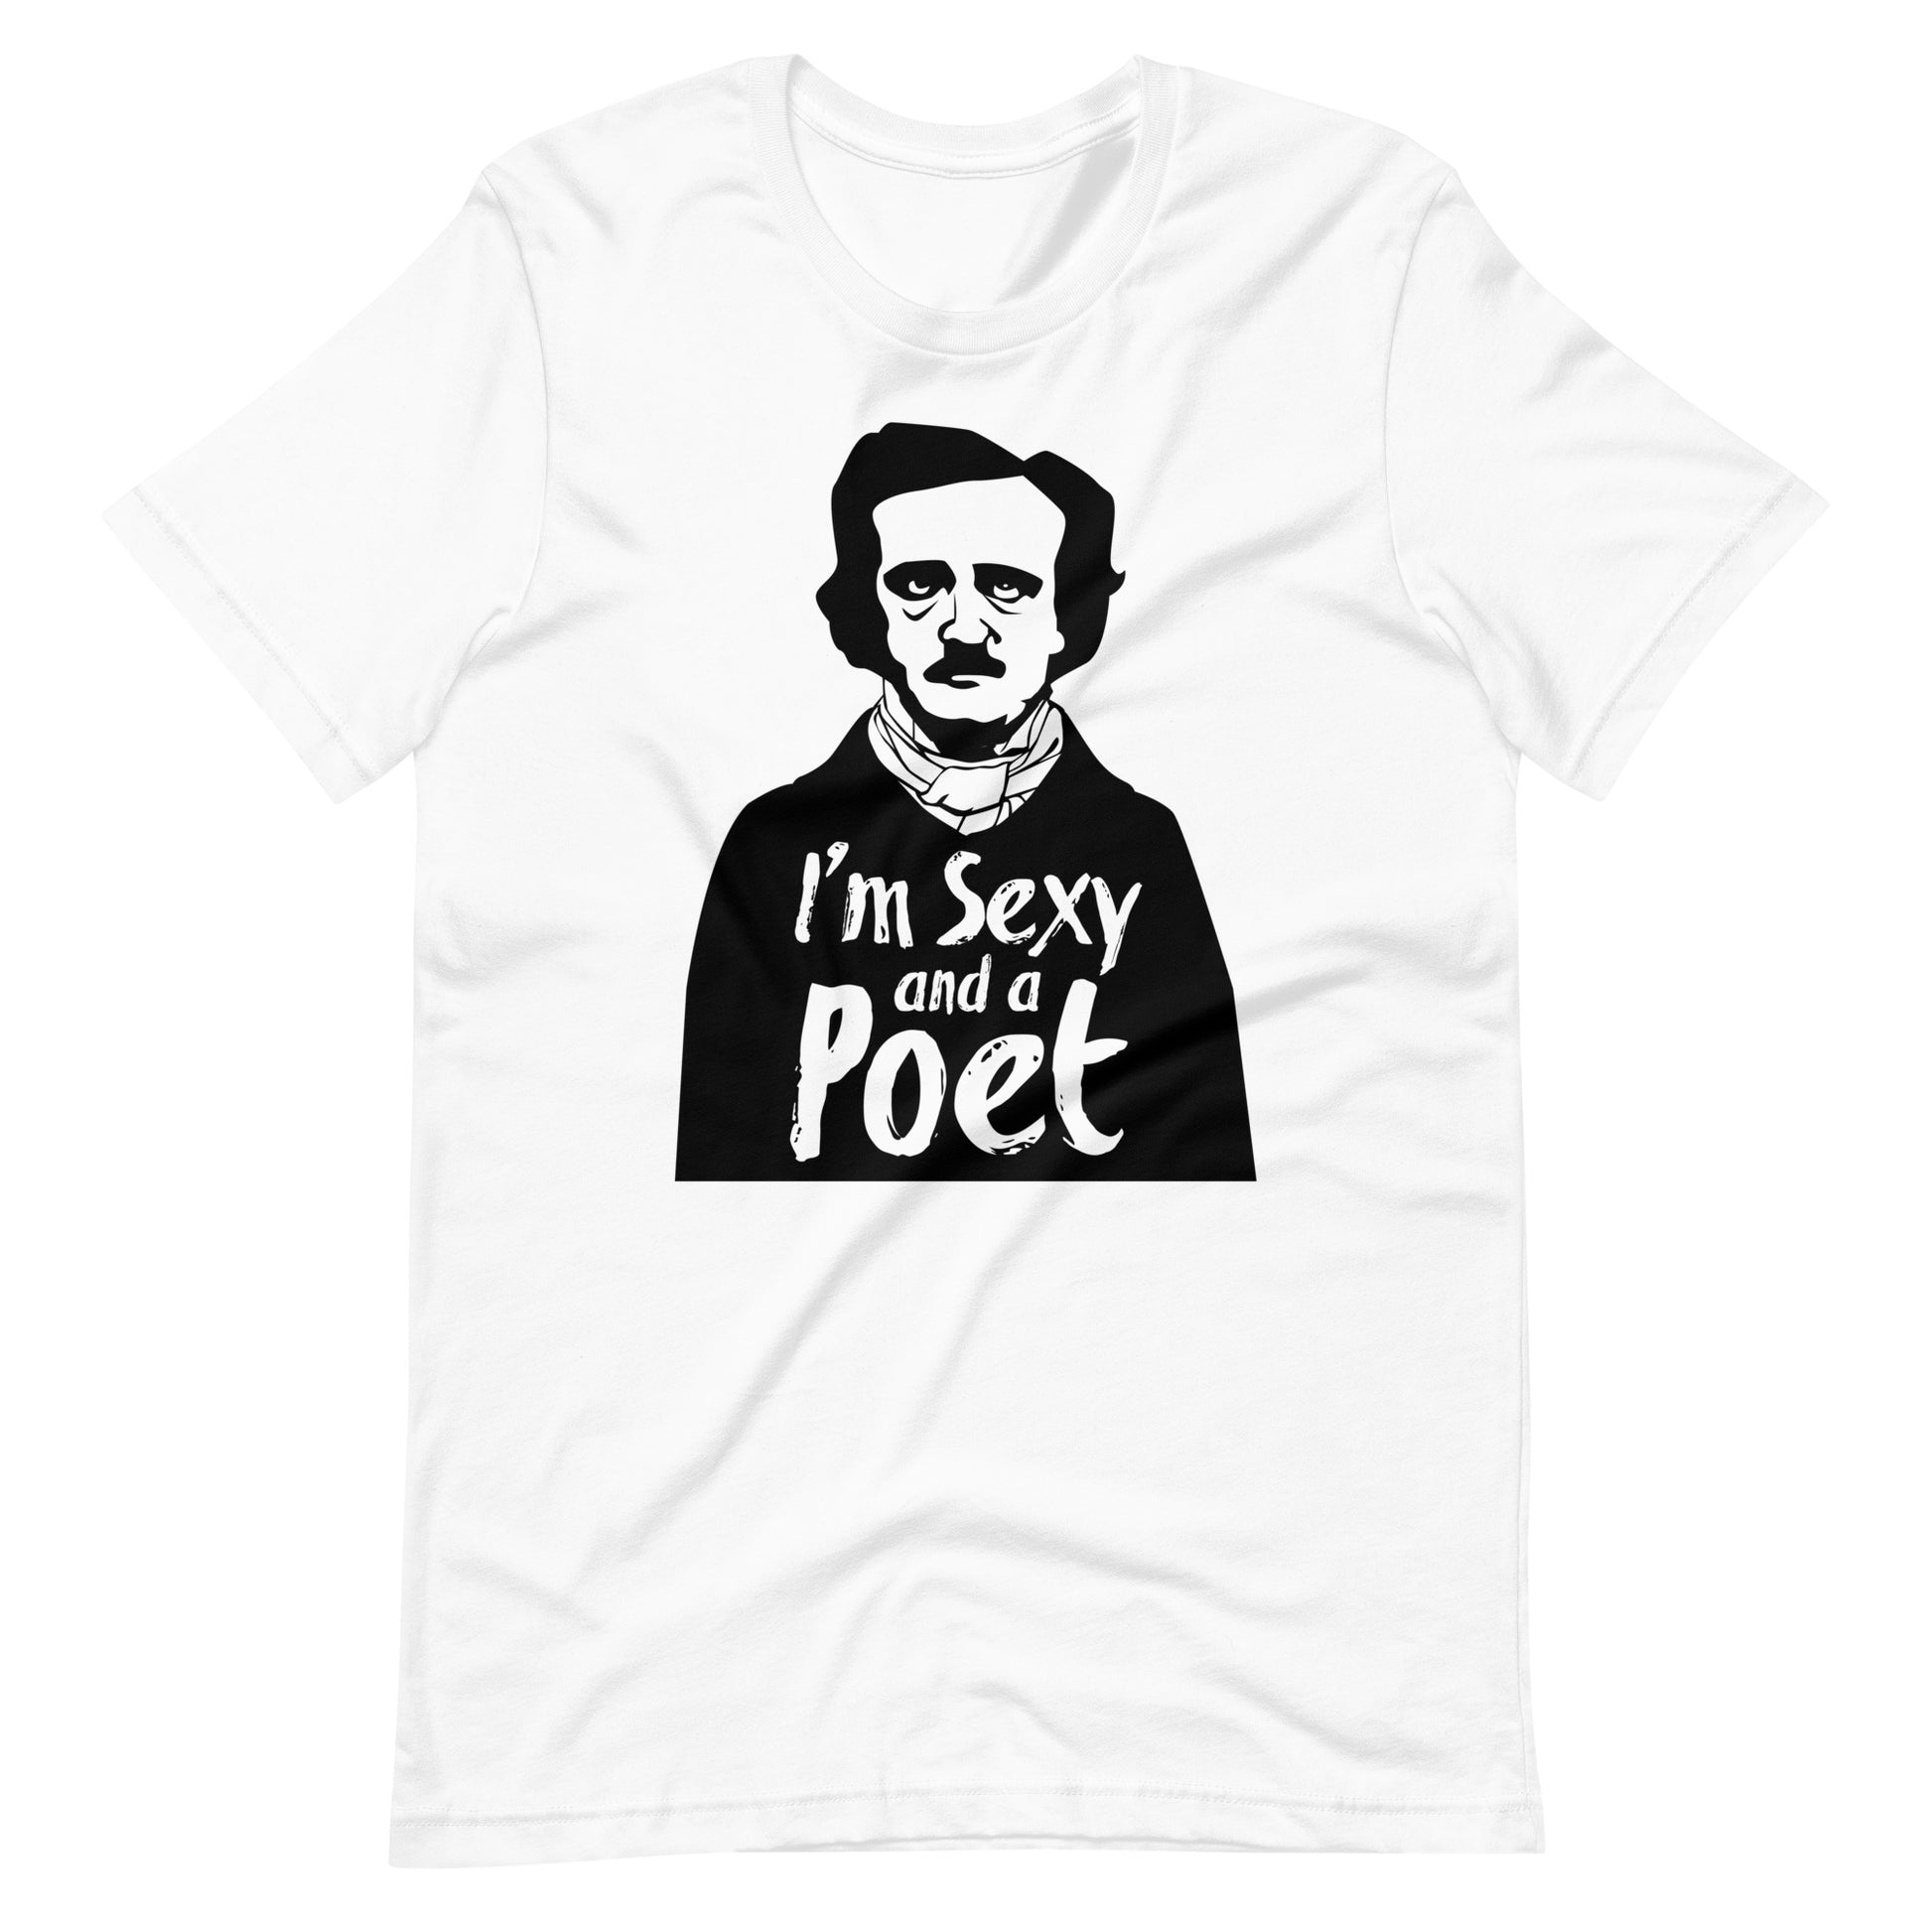 Women's Edgar Allan Poe "I'm Sexy and a Poet" t-shirt - White Front